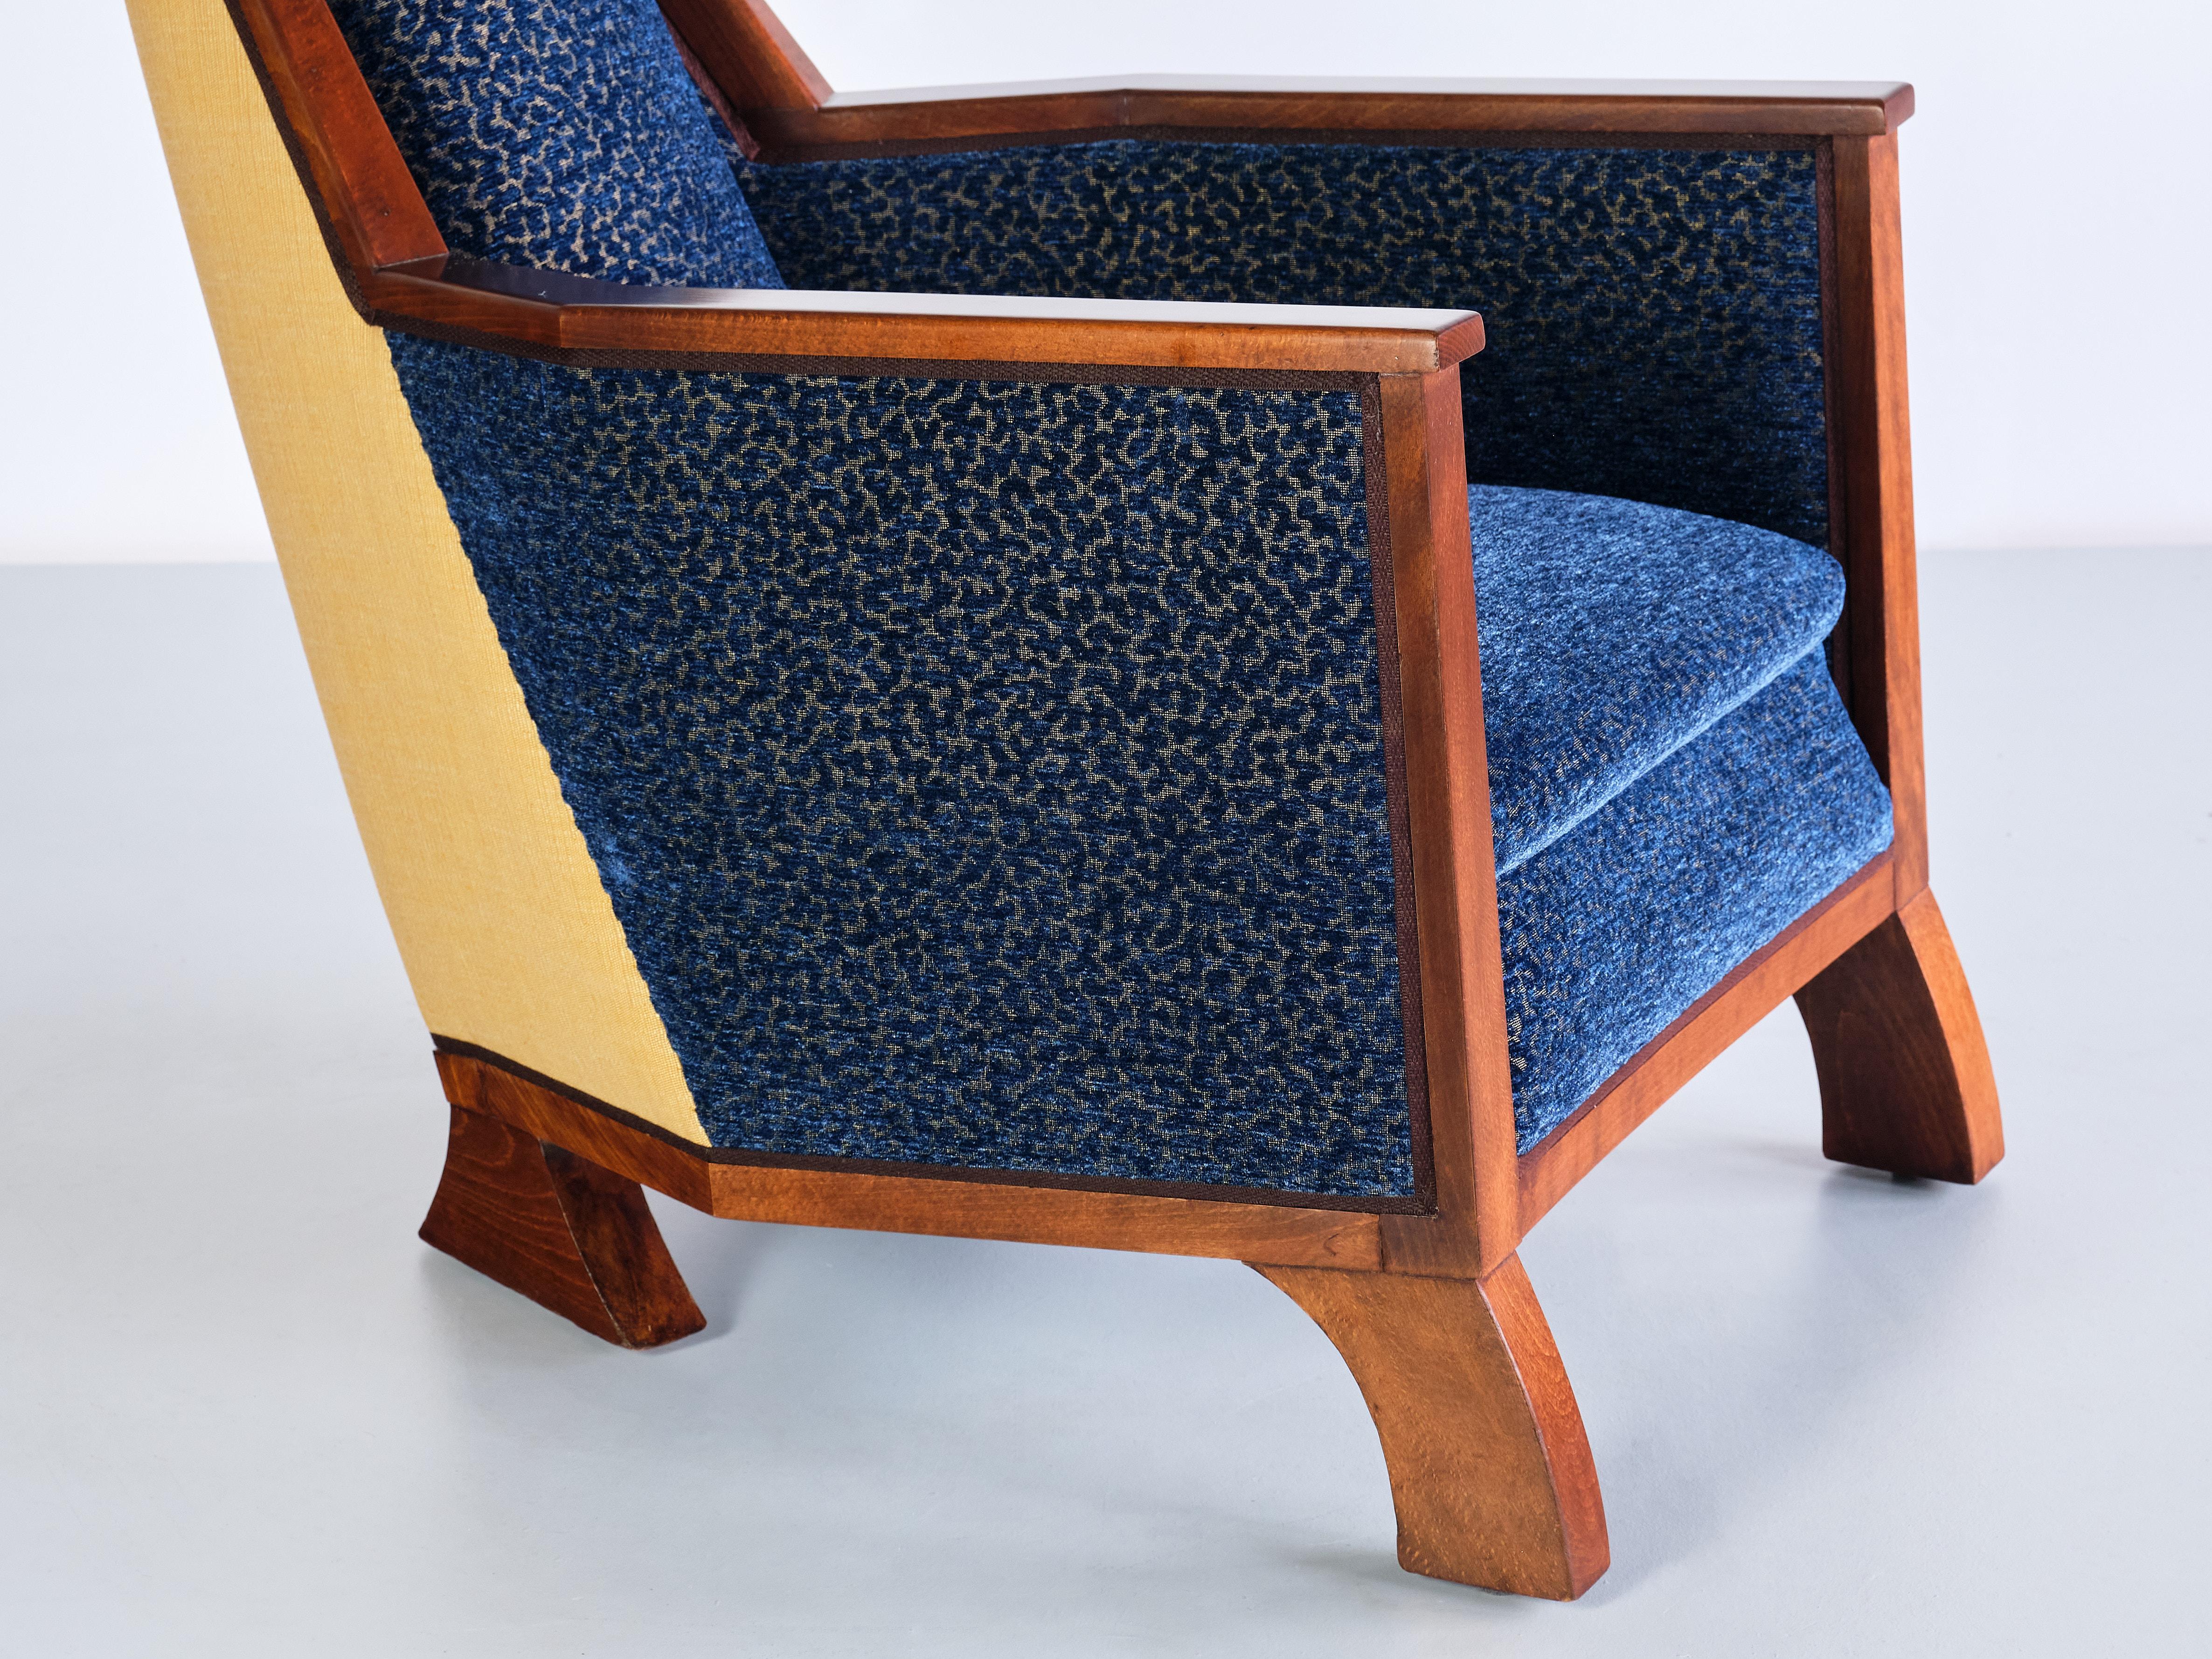 Exceptional Art Deco Arm Chair in Blue Velvet and Maple, Northern France, 1920s For Sale 4